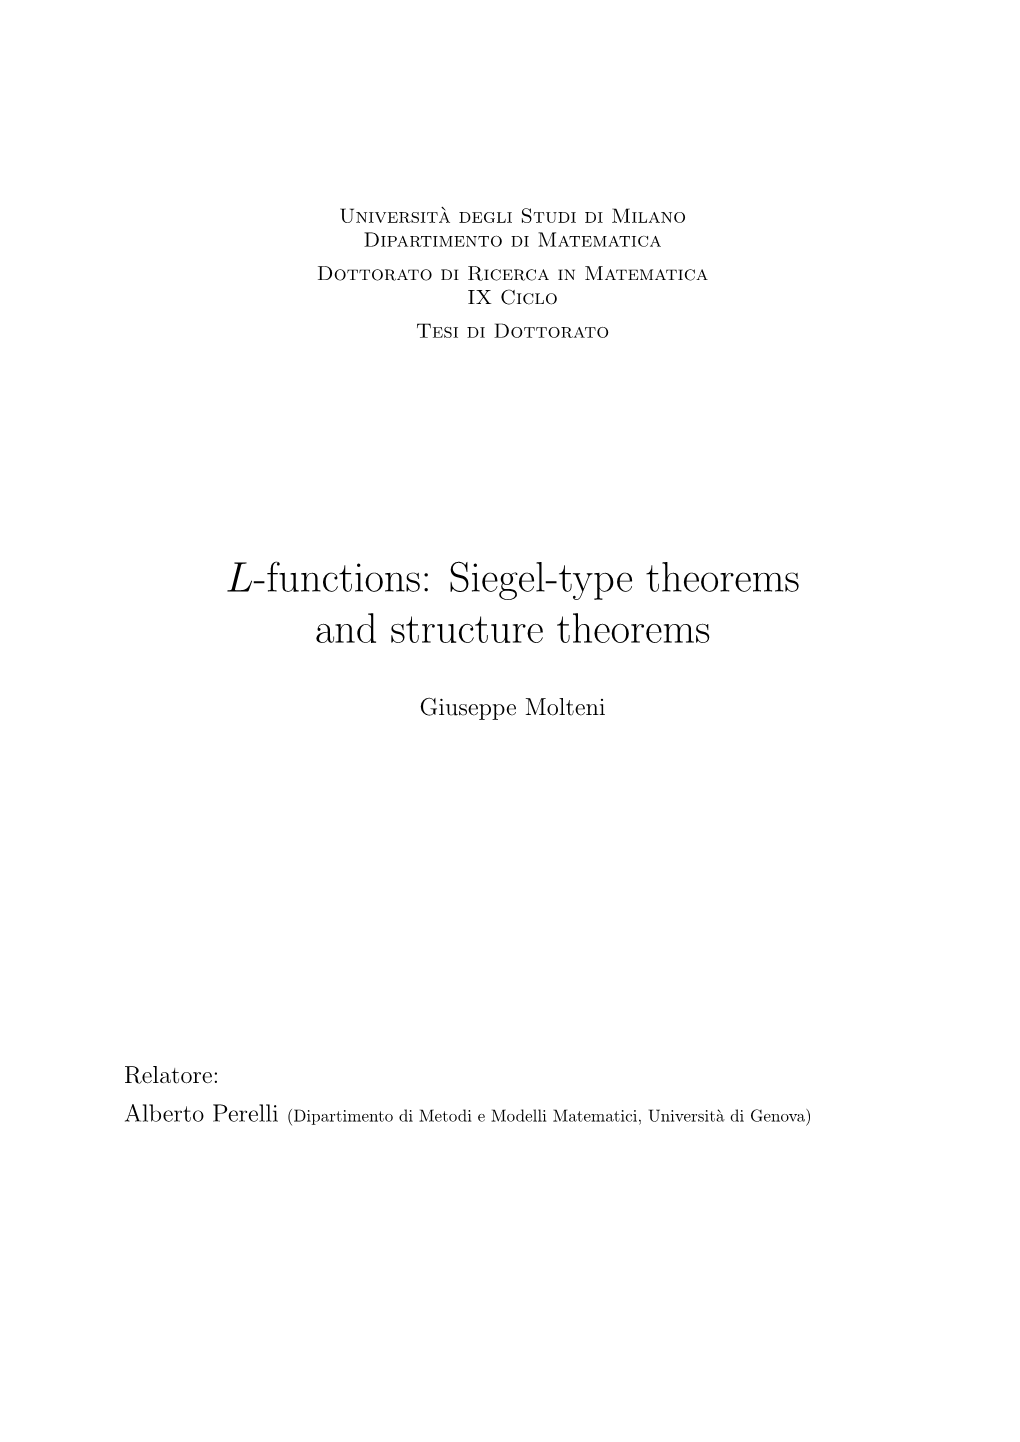 L-Functions: Siegel-Type Theorems and Structure Theorems